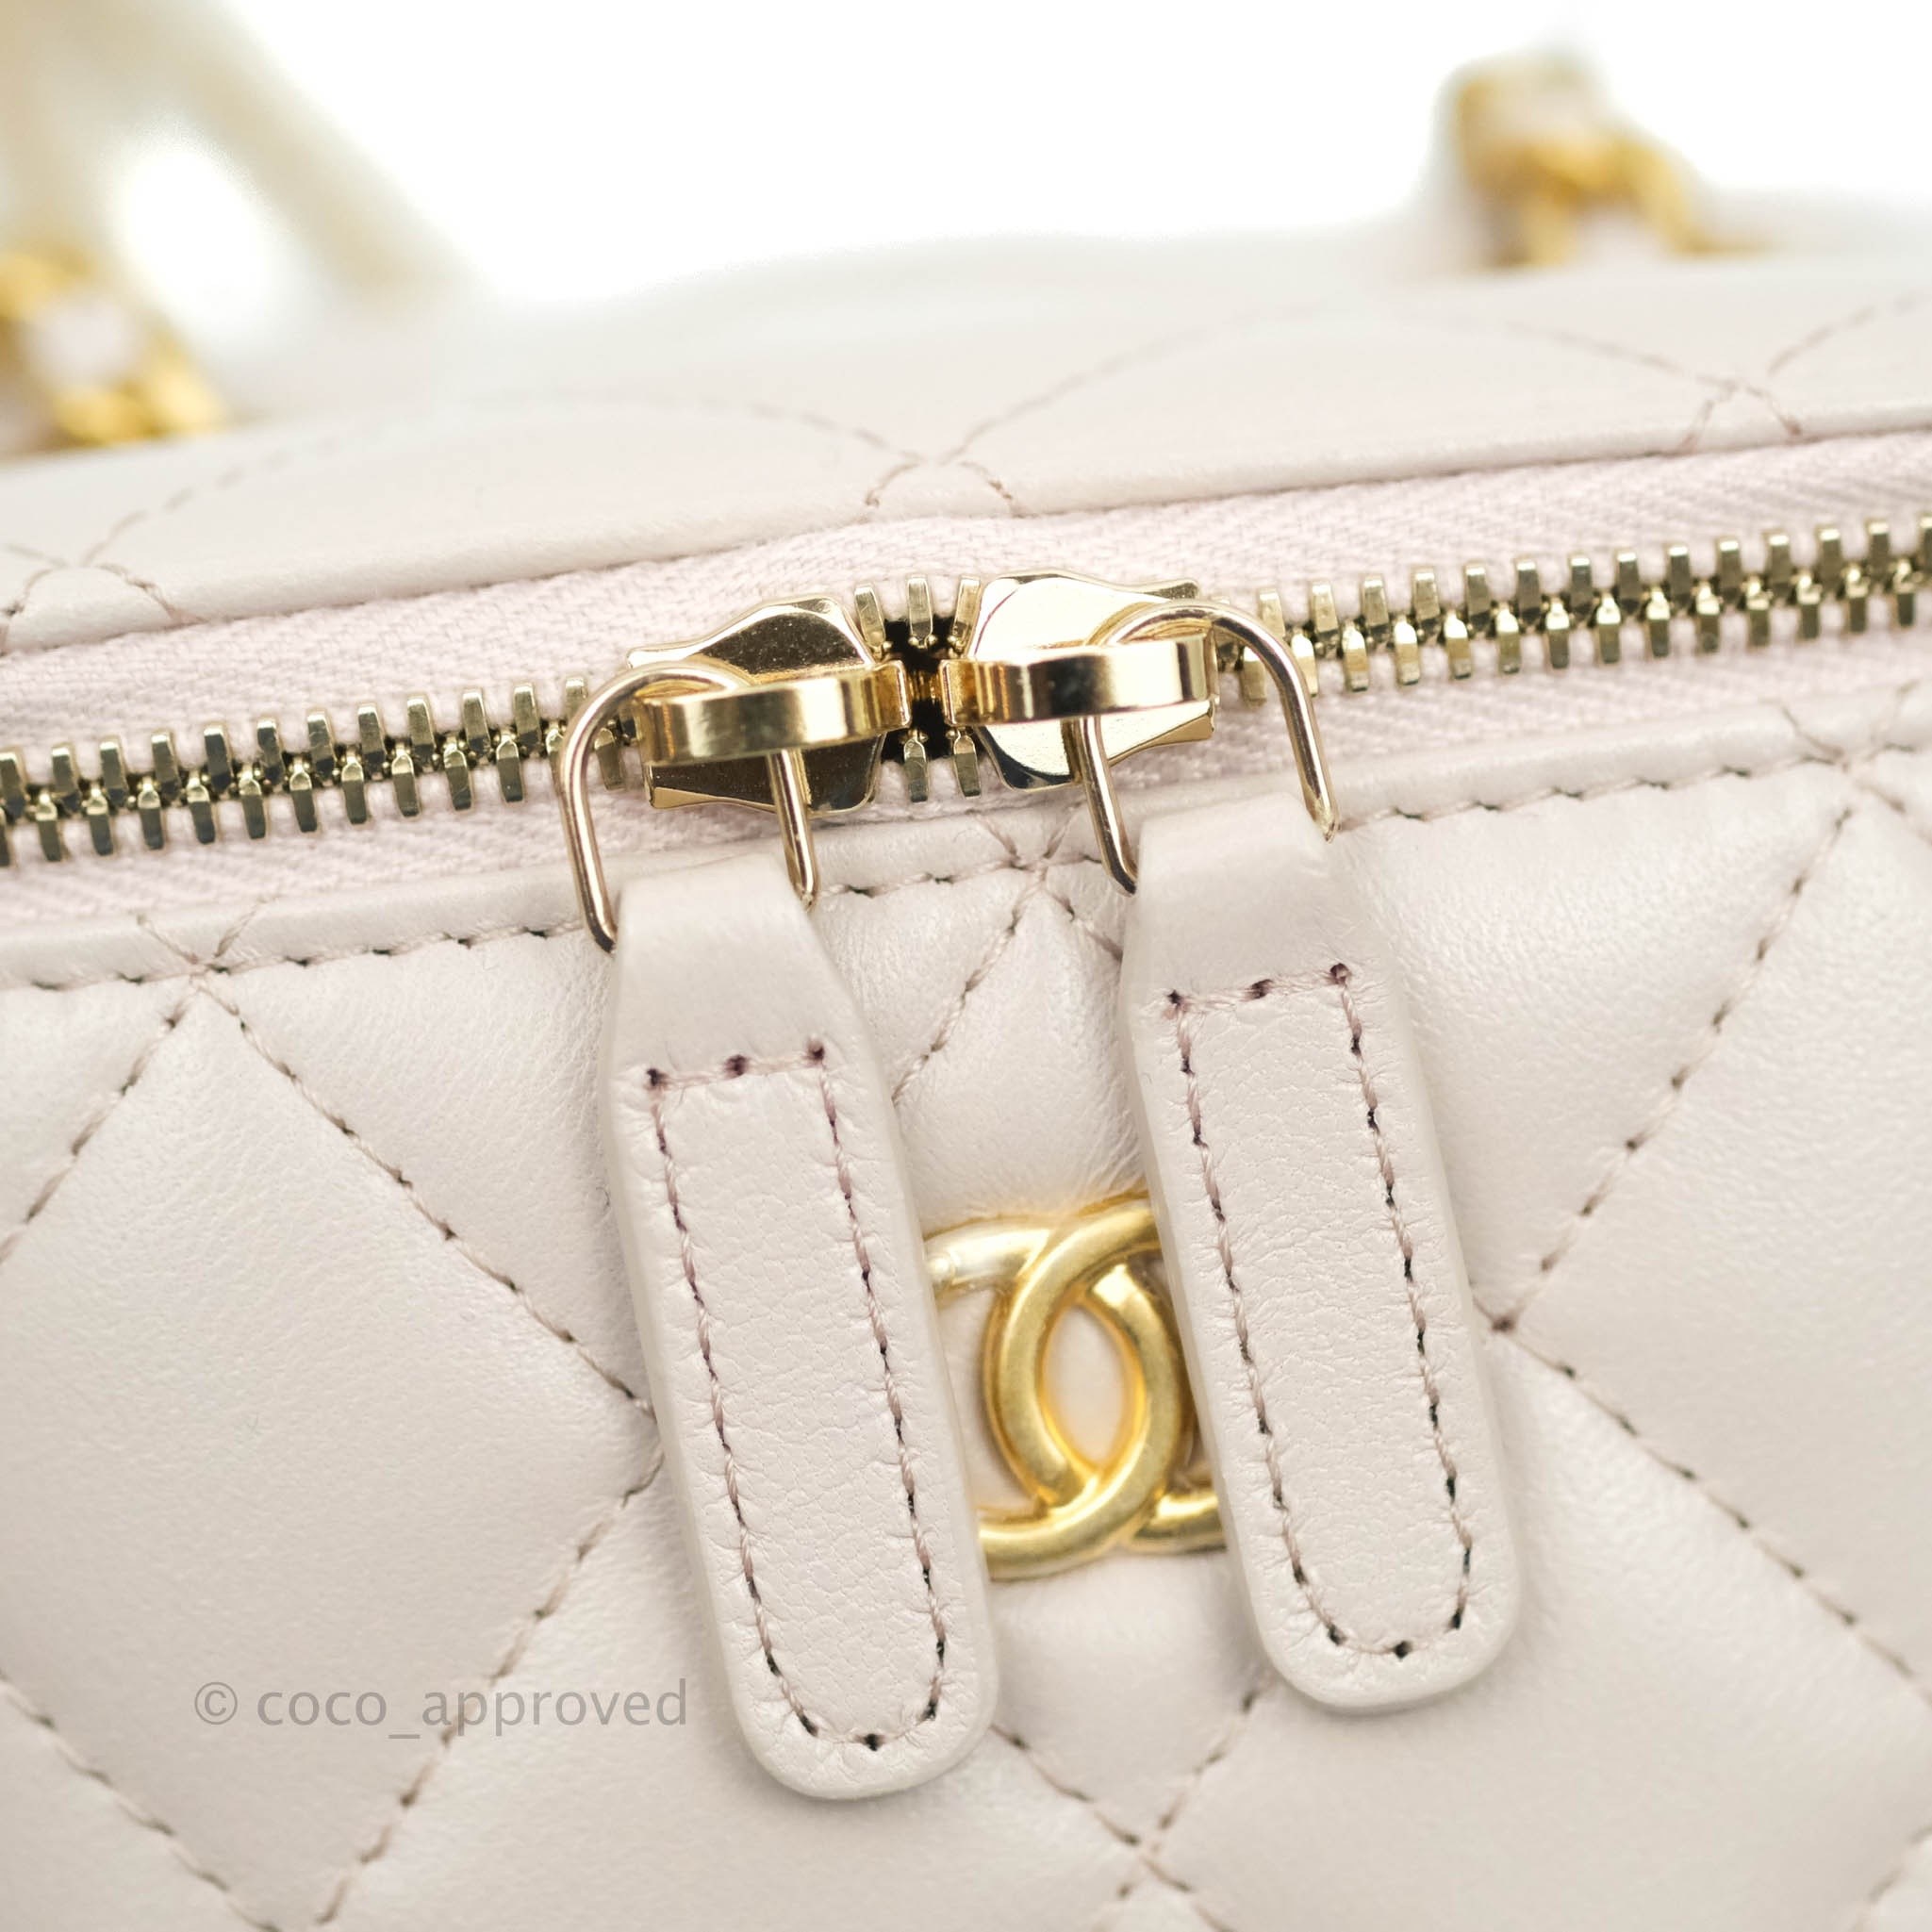 Chanel Classic Mini Pearl Crush Vanity With Chain Lilac Pink Lambskin –  Coco Approved Studio